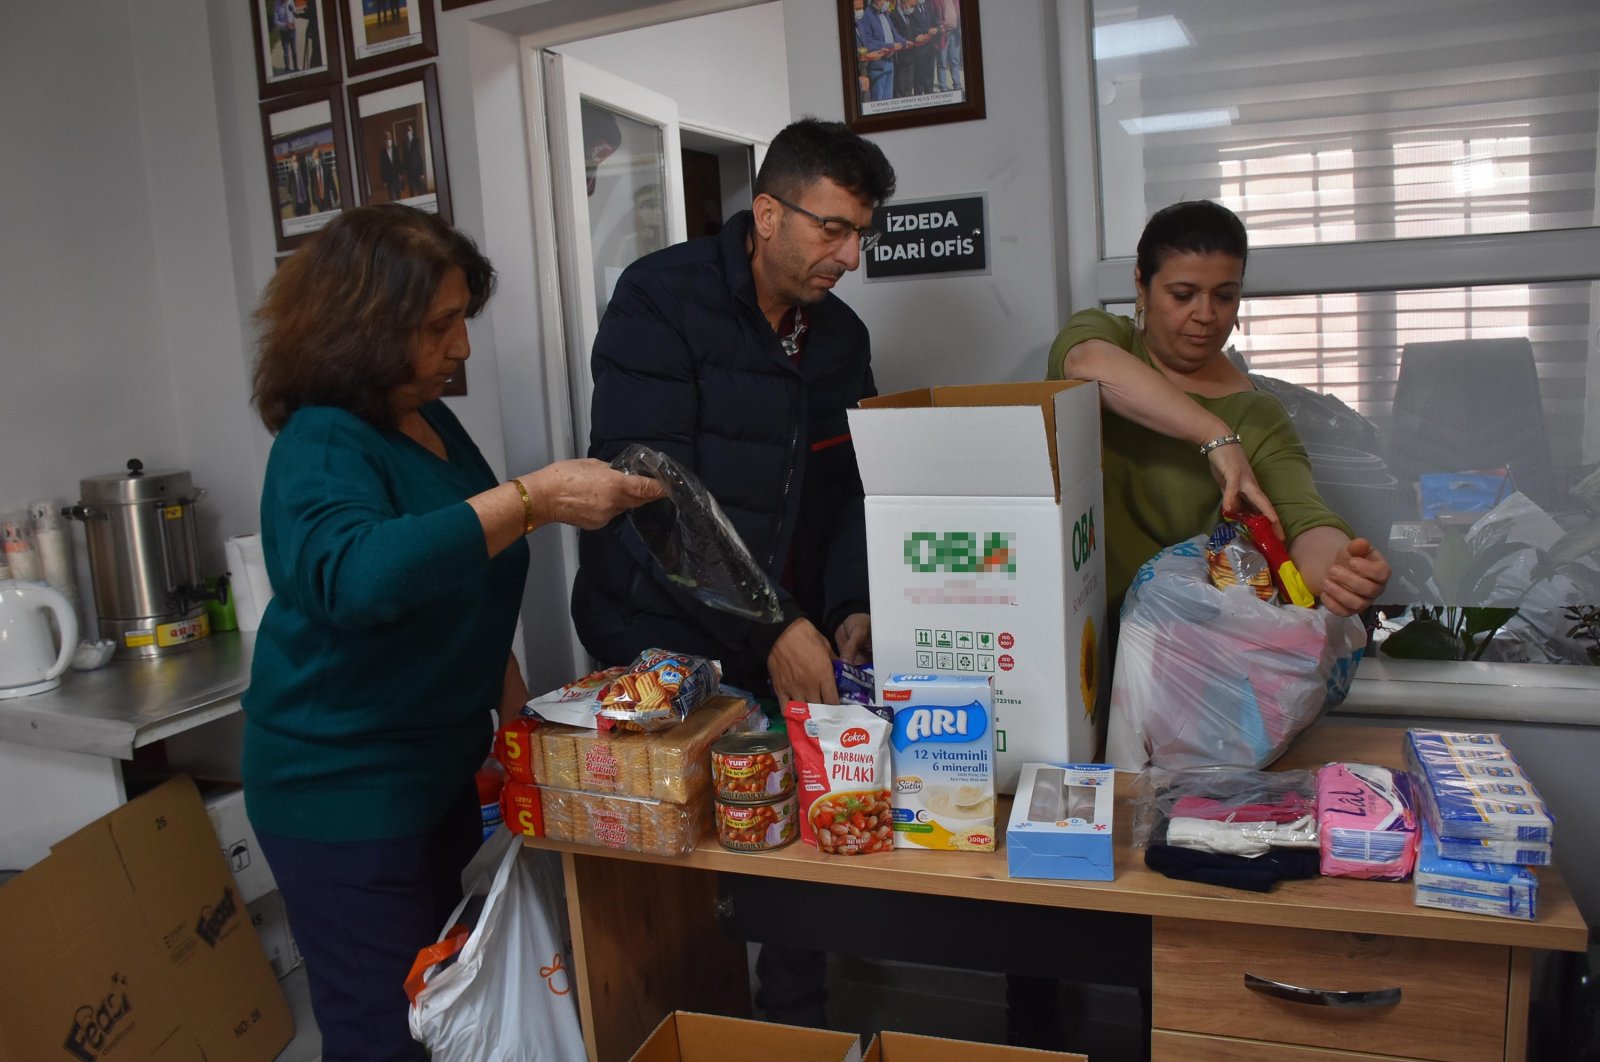 Members of the IZDEDA association are packing aid boxes for the 7.7 and 7.6 earthquake-hit areas, Izmir, Türkiye, Feb. 8, 2023. (DHA Photo)